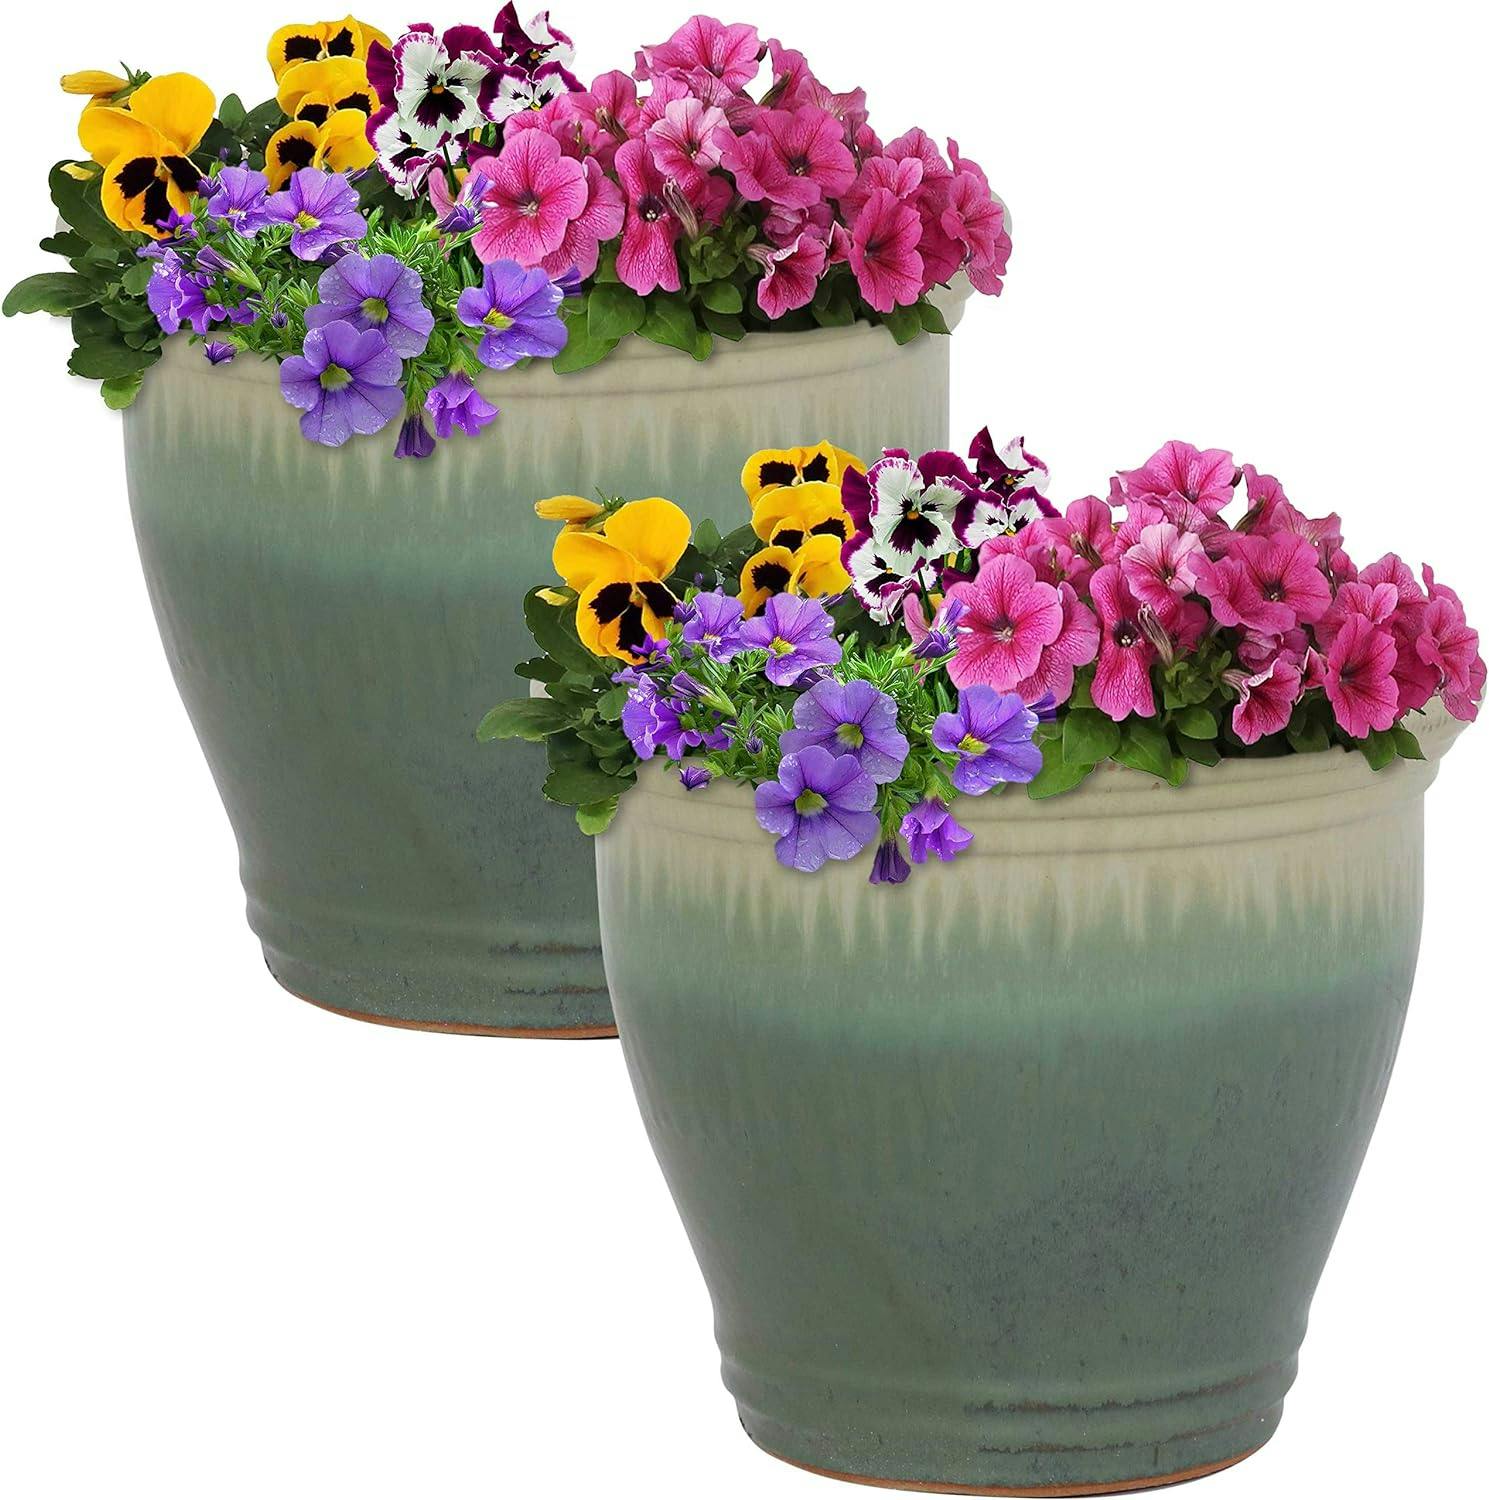 Seafoam High-Fired Glazed Ceramic Planter Duo with Drainage, 11-Inch